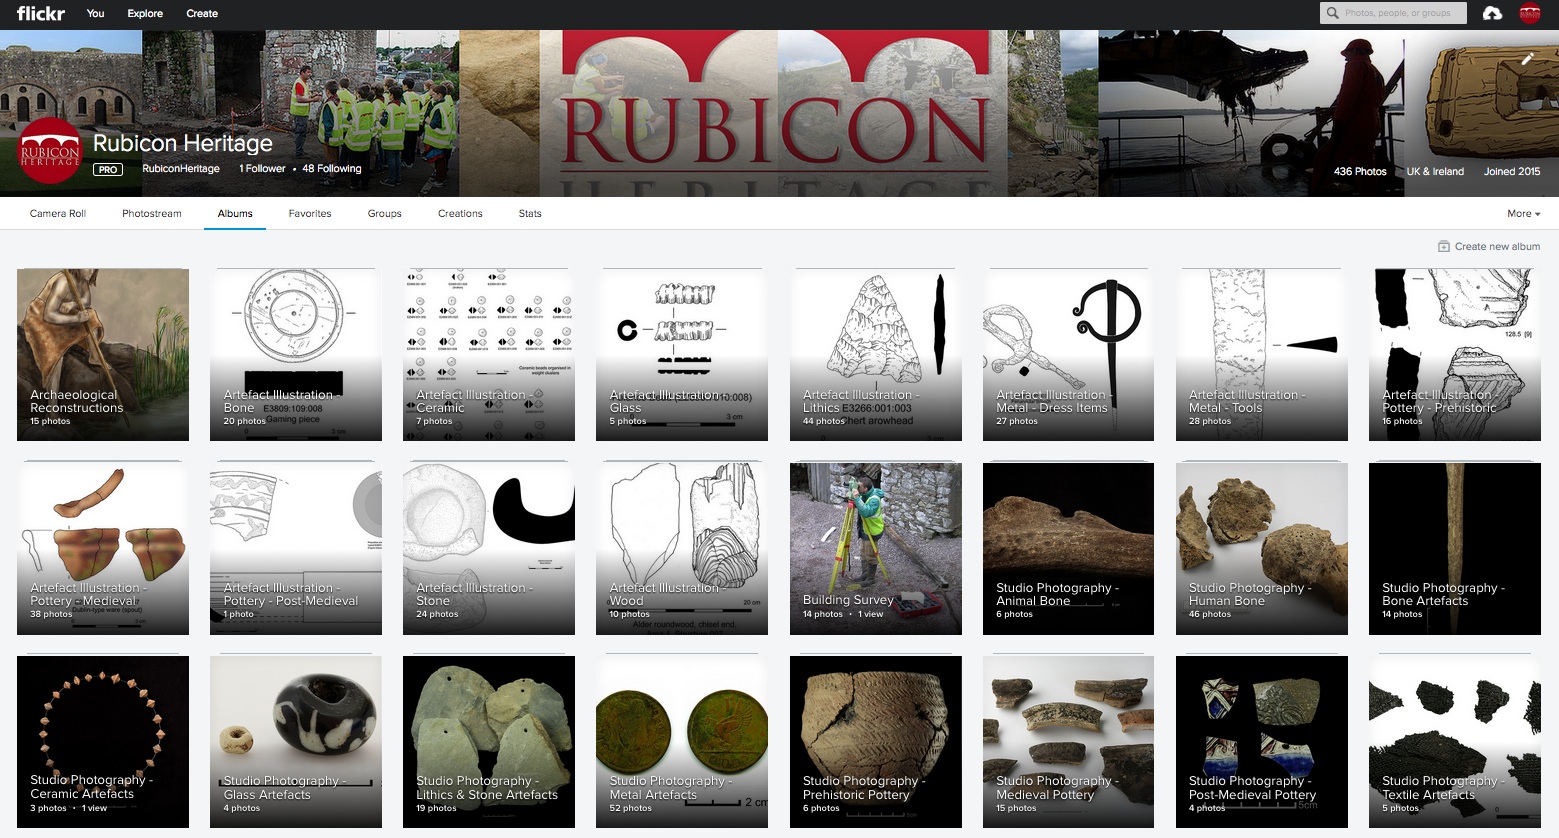 You are currently viewing Rubicon Heritage Flickr Page